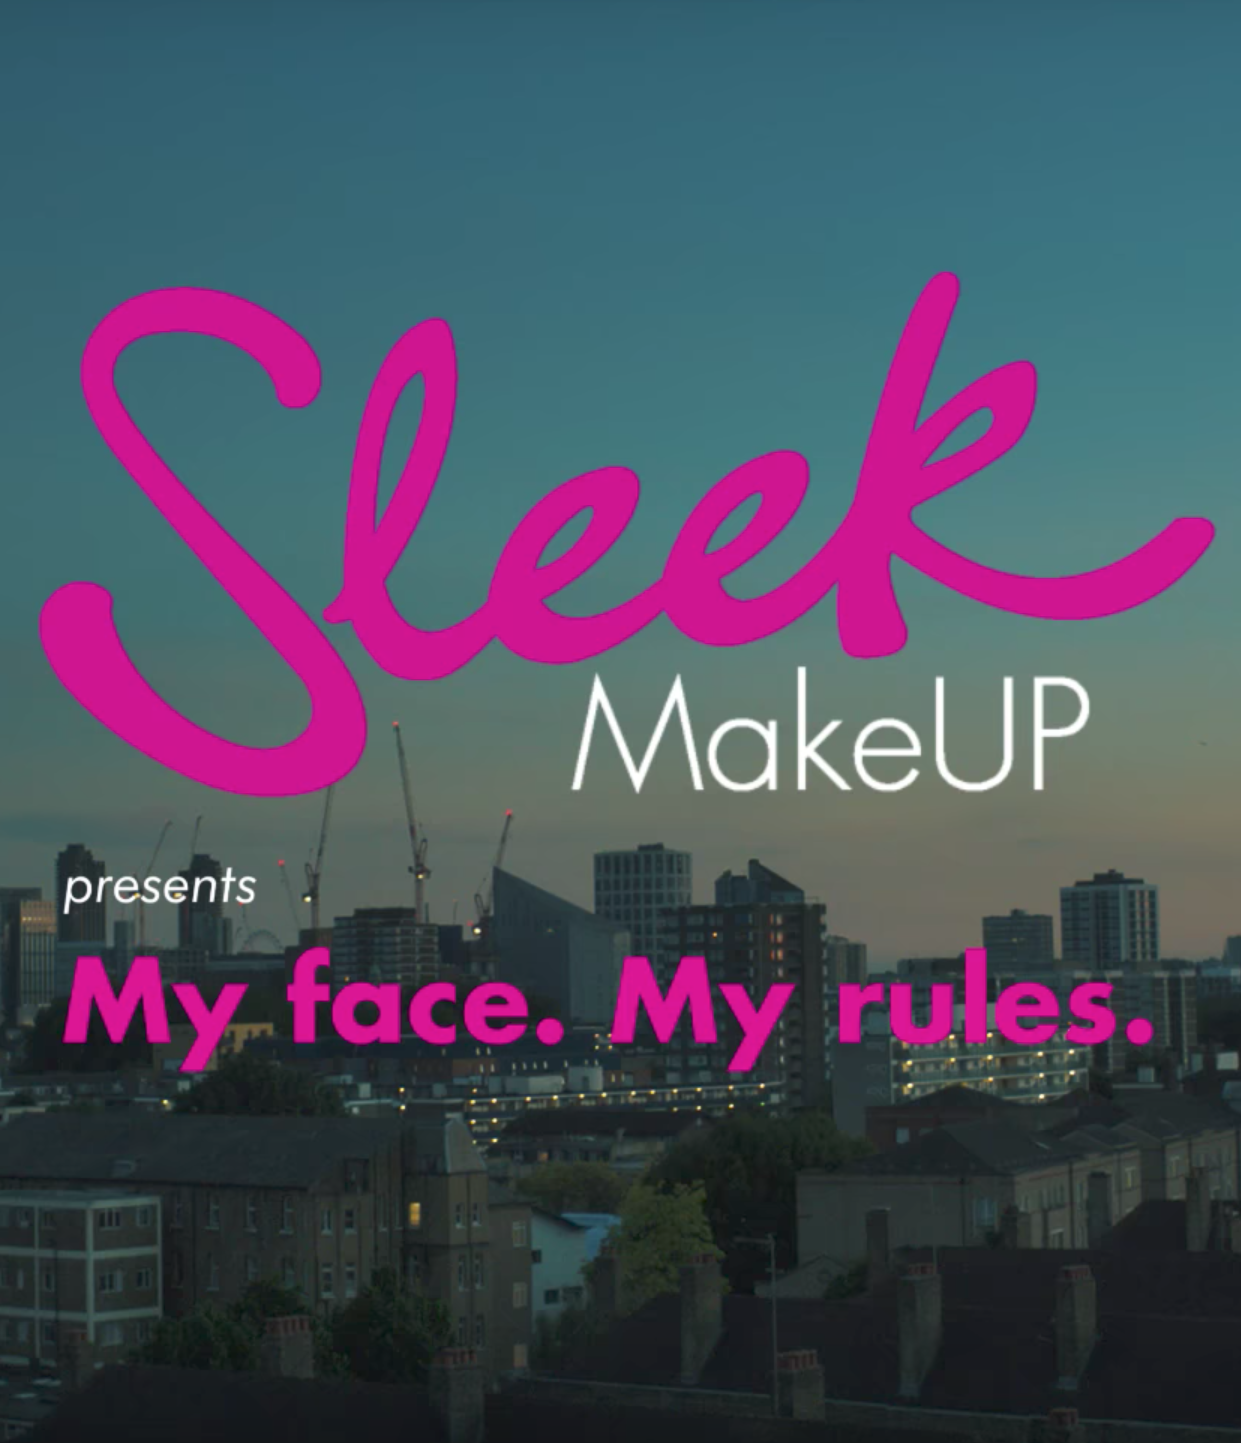 Uni-versal Extras supplied casting services for Sleep MakeUP's 'My Face My Rules' internet viral campaign.